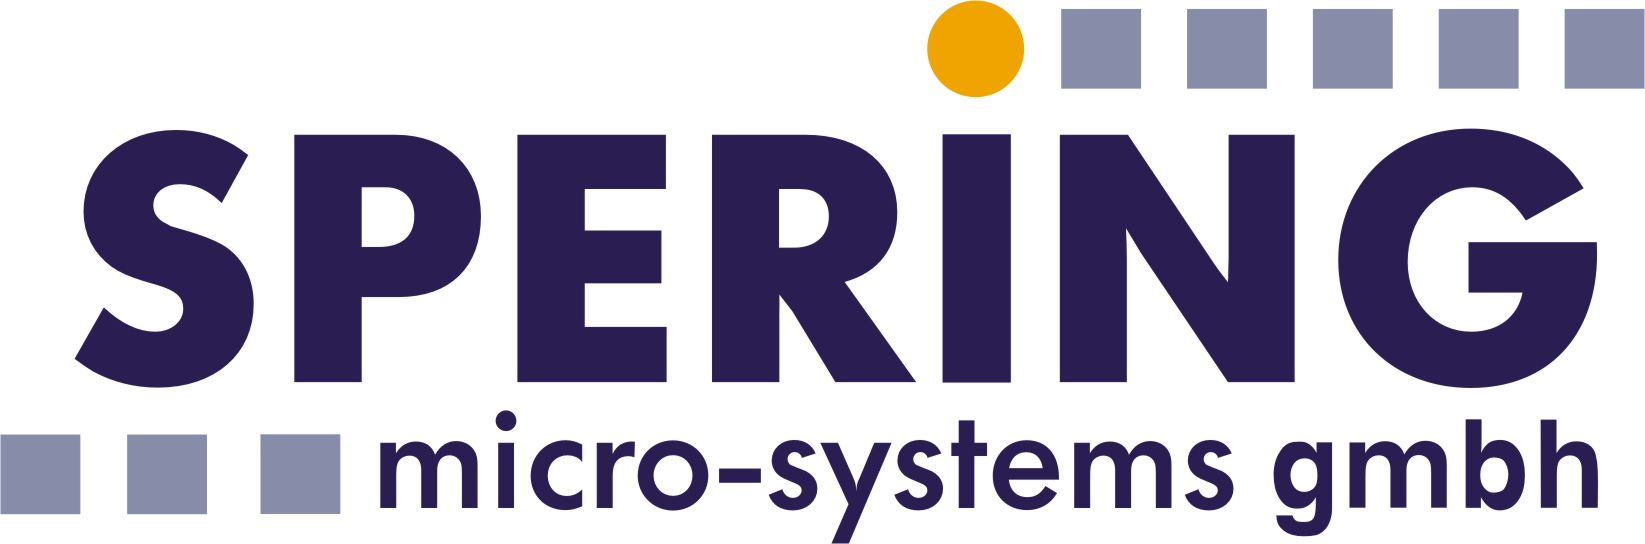 SPERING micro-systems gmbh